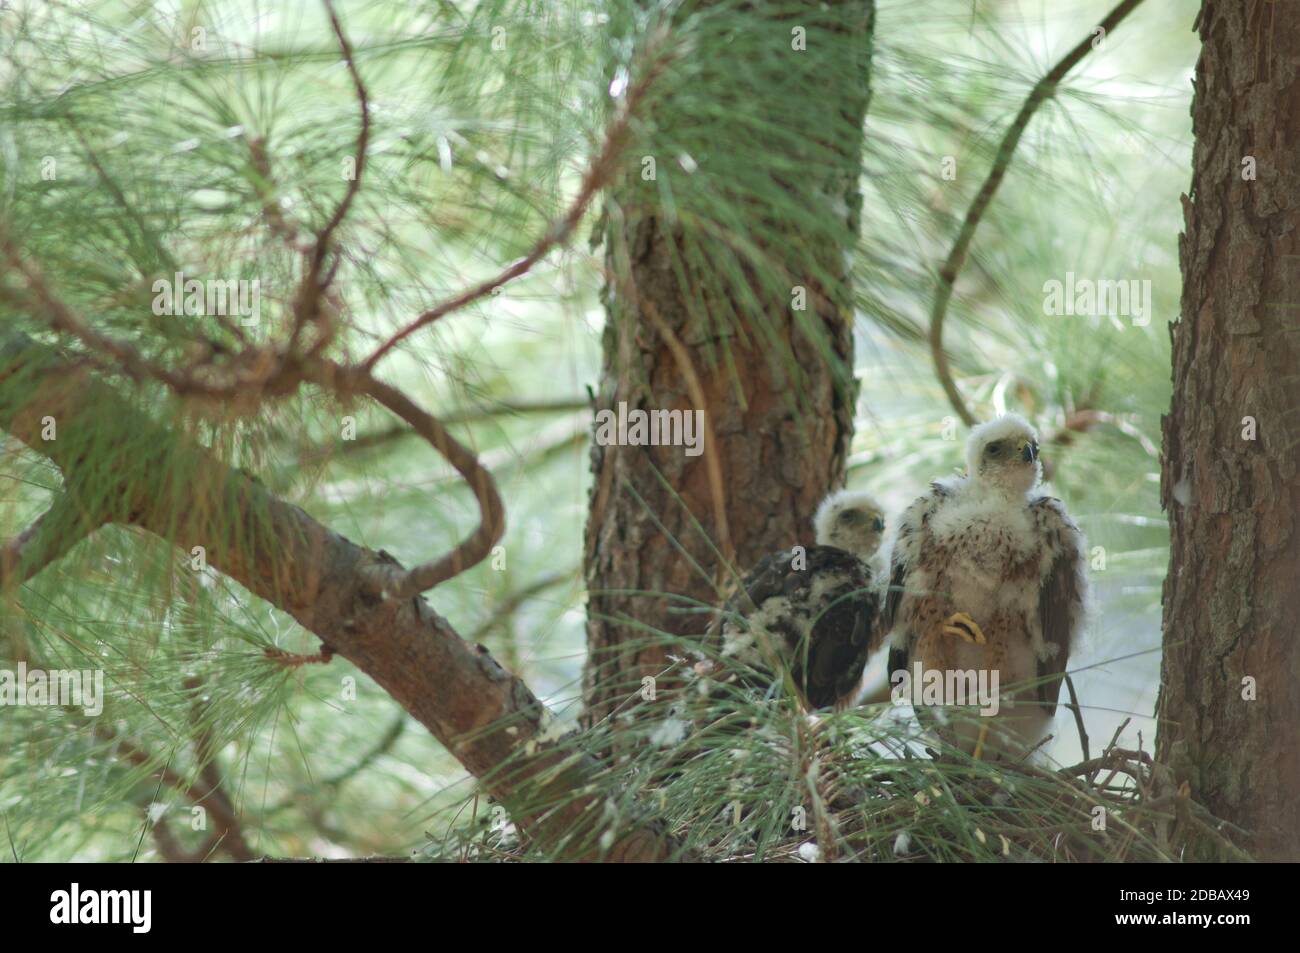 Chicks of Eurasian sparrowhawk Accipiter nisus granti in the nest. Integral Natural Reserve of Inagua. Gran Canaria. Canary Islands. Spain. Stock Photo